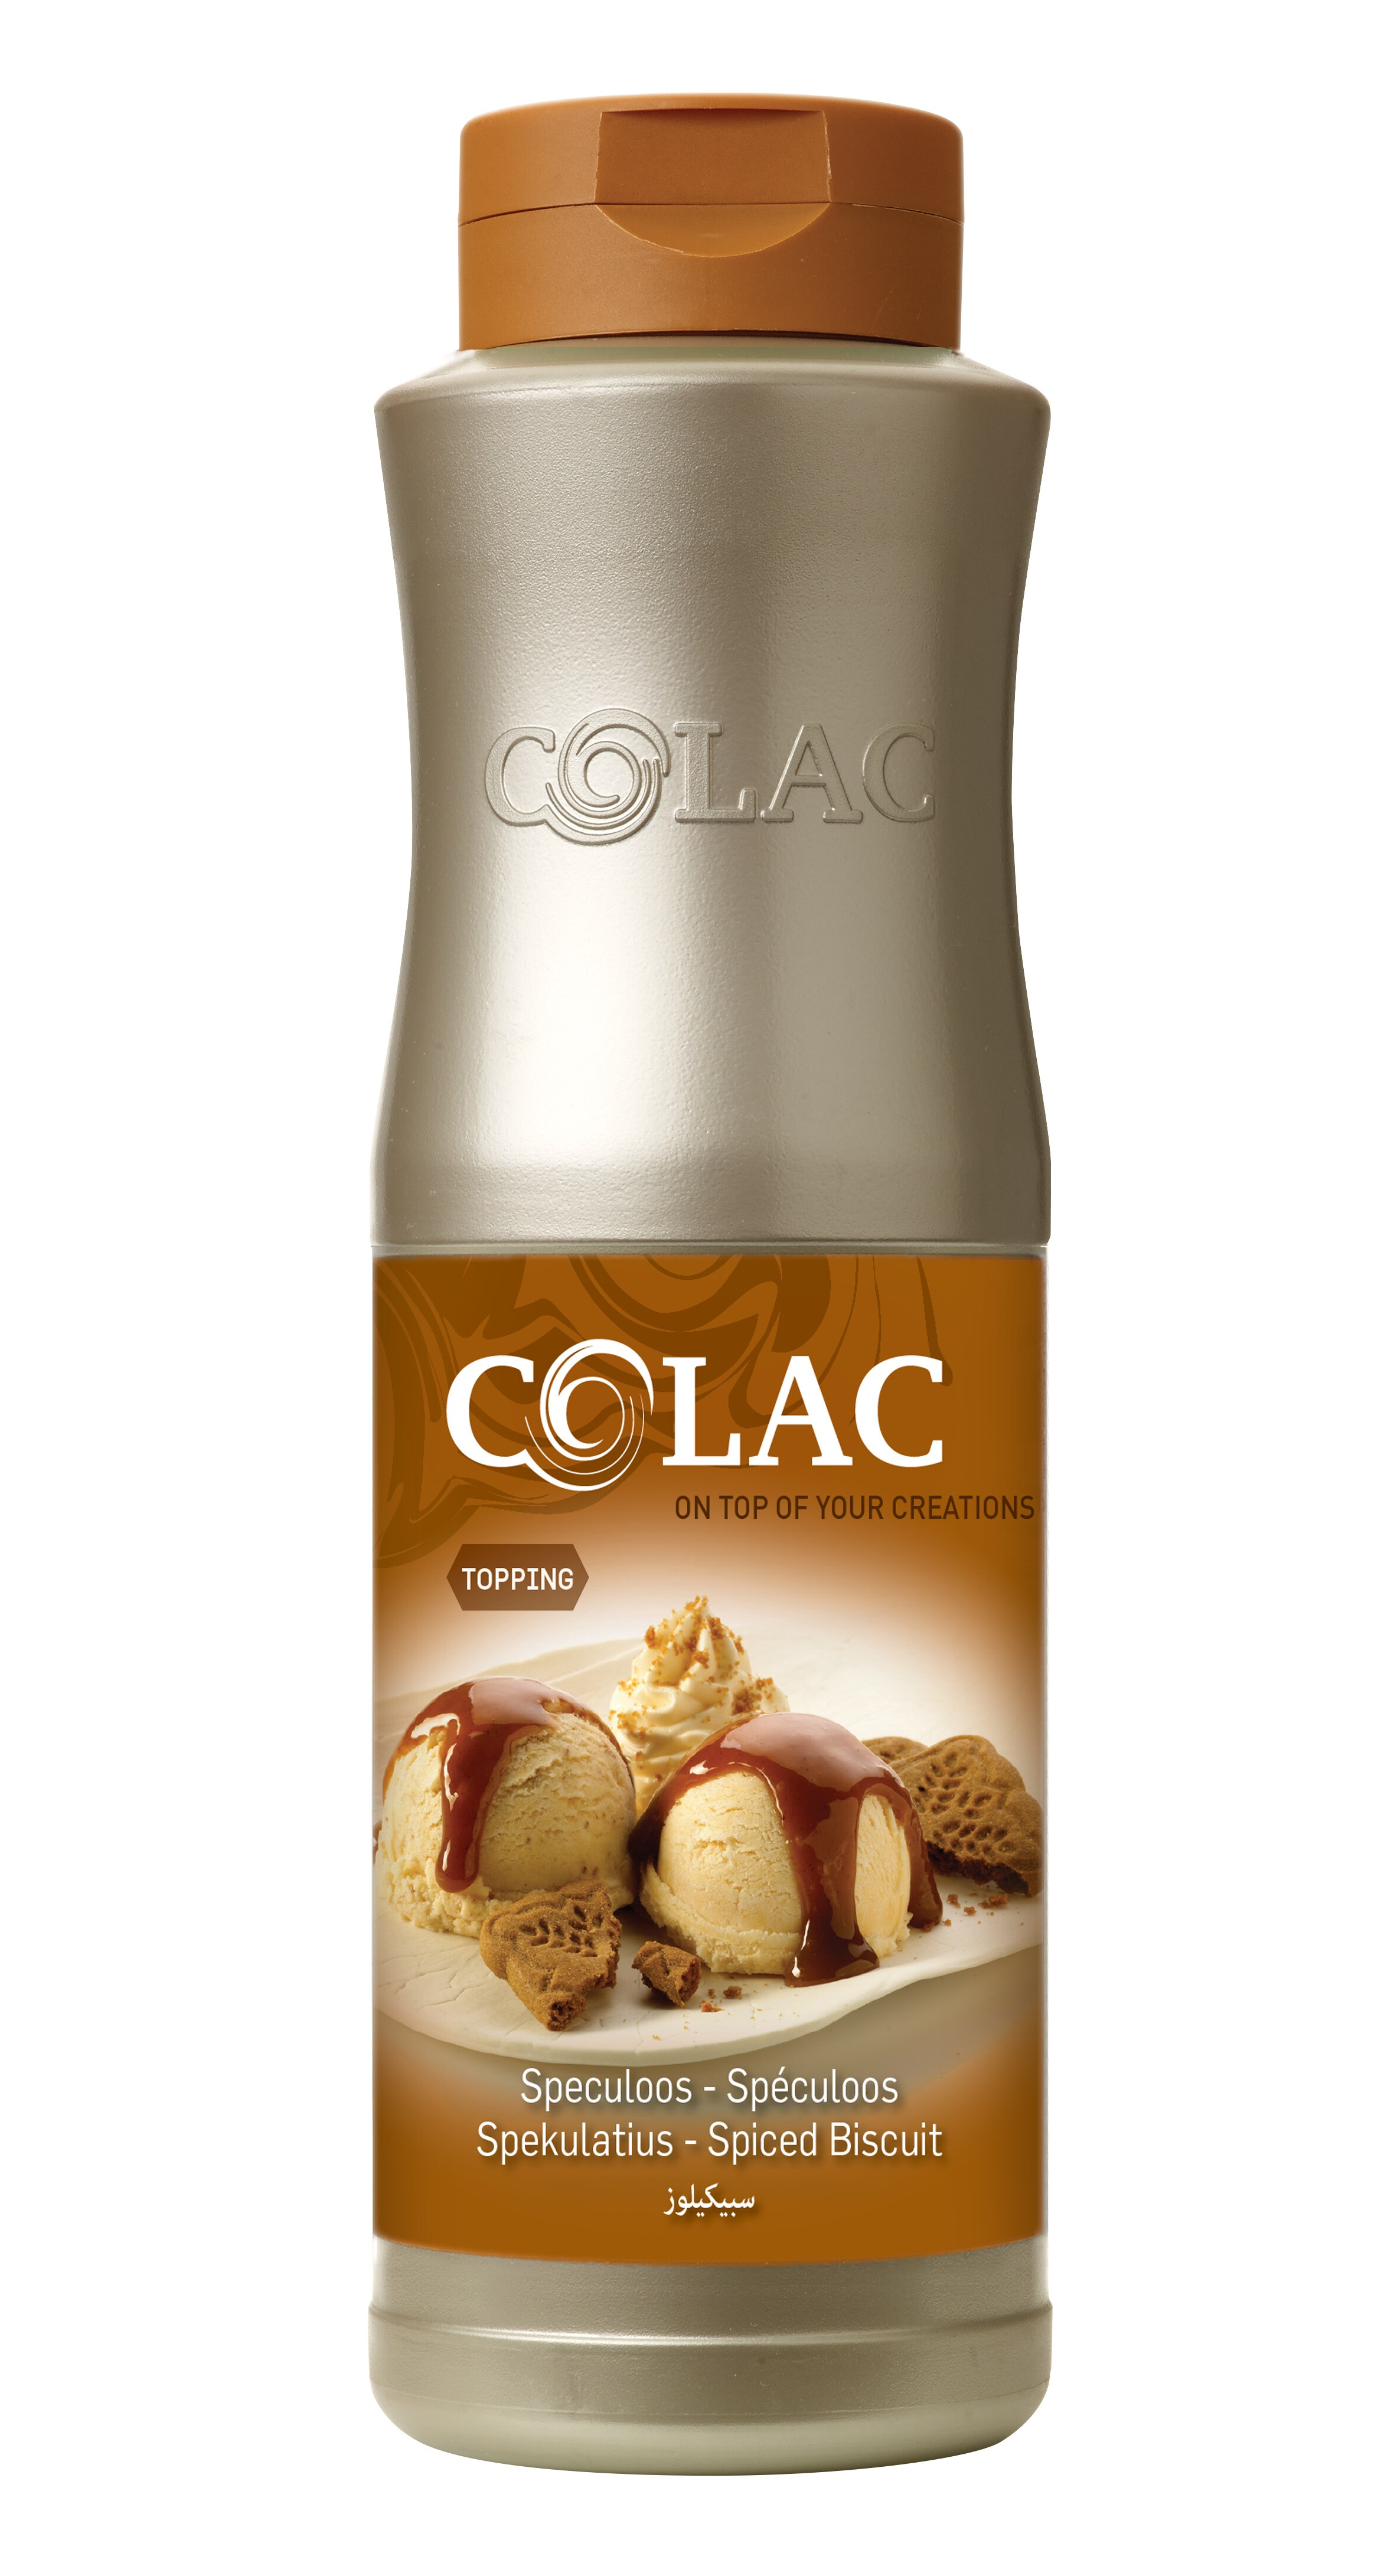 Colac Topping Cinnamon Biscuit 1L Dessert Sauce